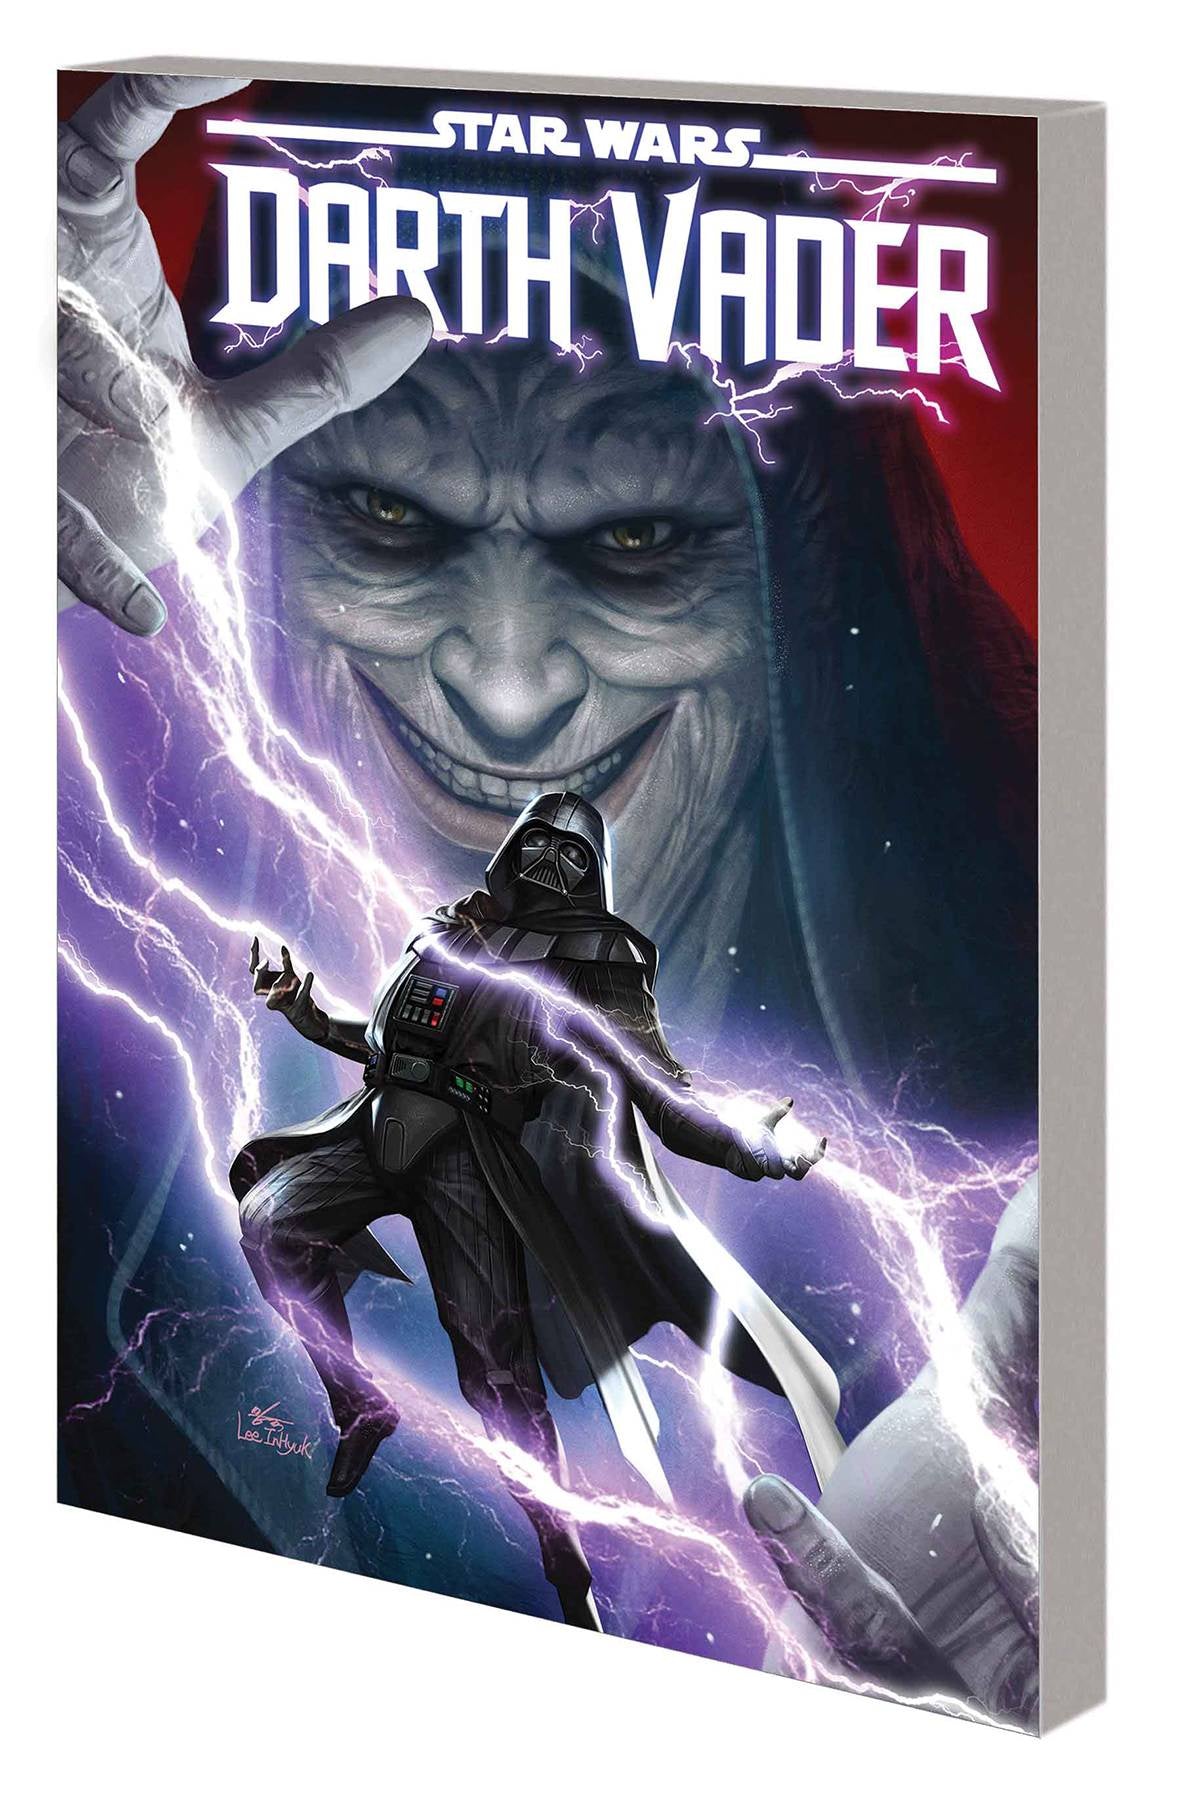 STAR WARS DARTH VADER BY GREG PAK VOLUME 02 INTO THE FIRE